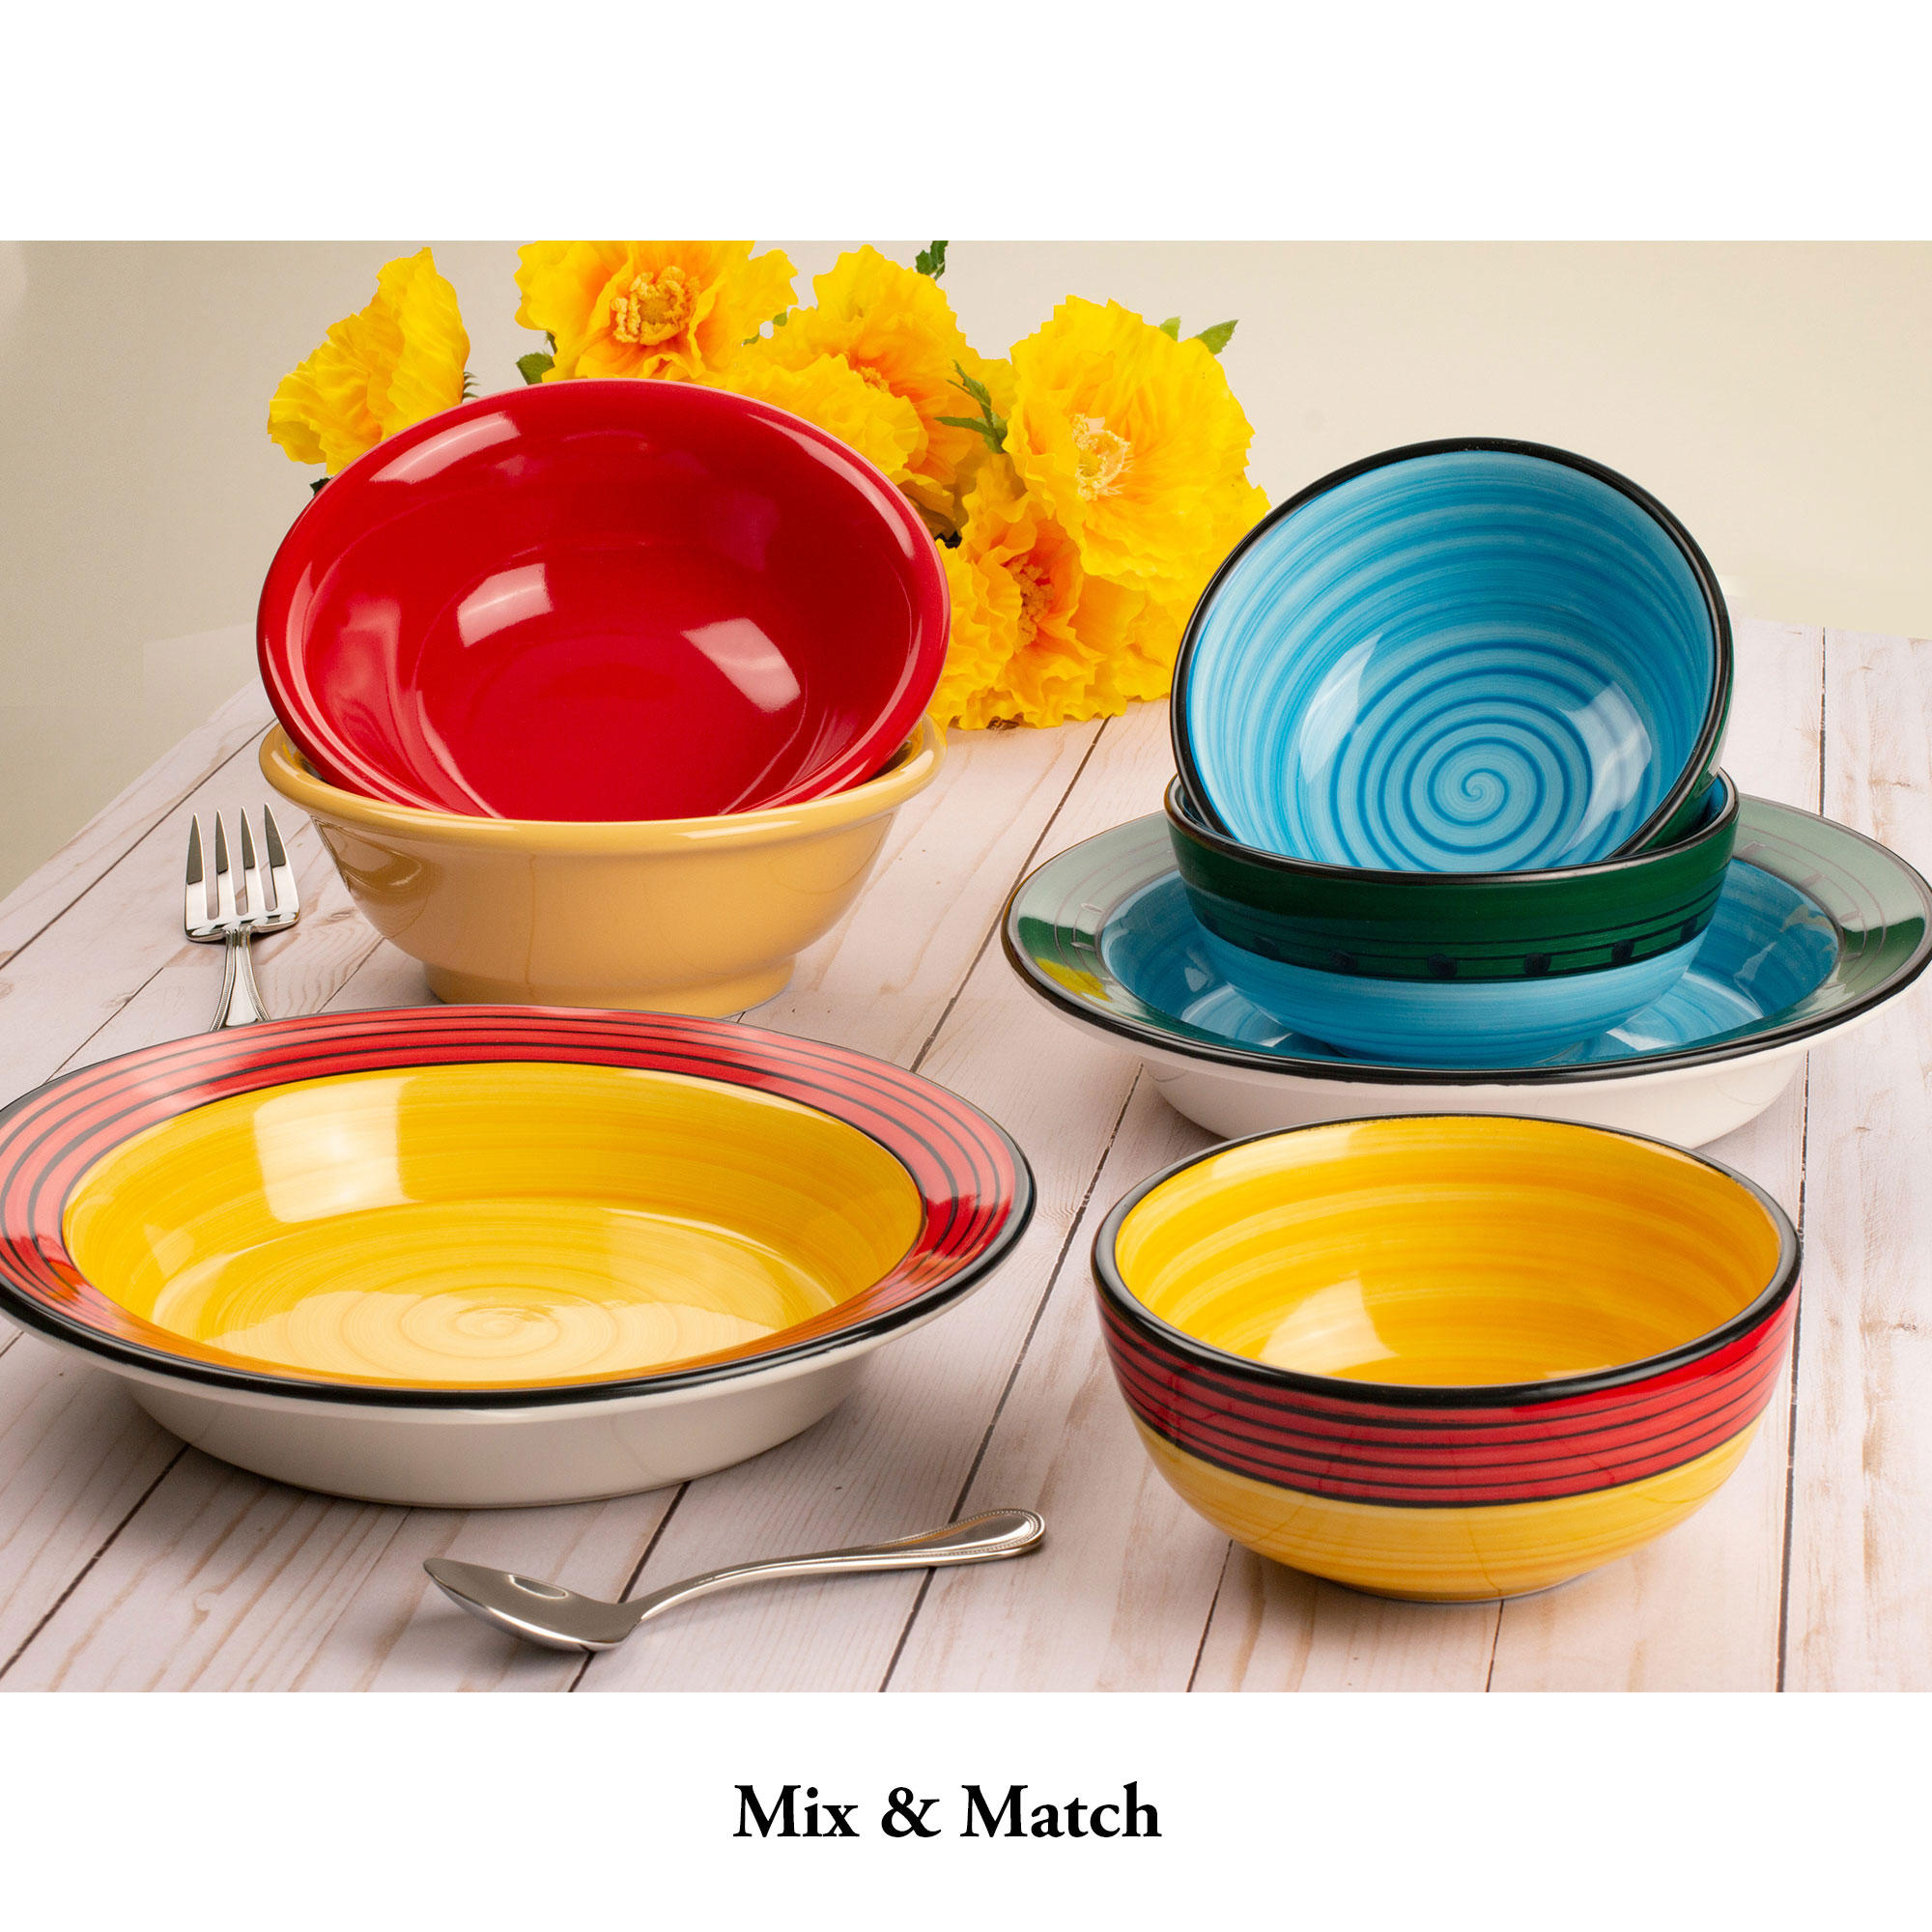 Mix and Match Dinnerware, Made 100% in the USA